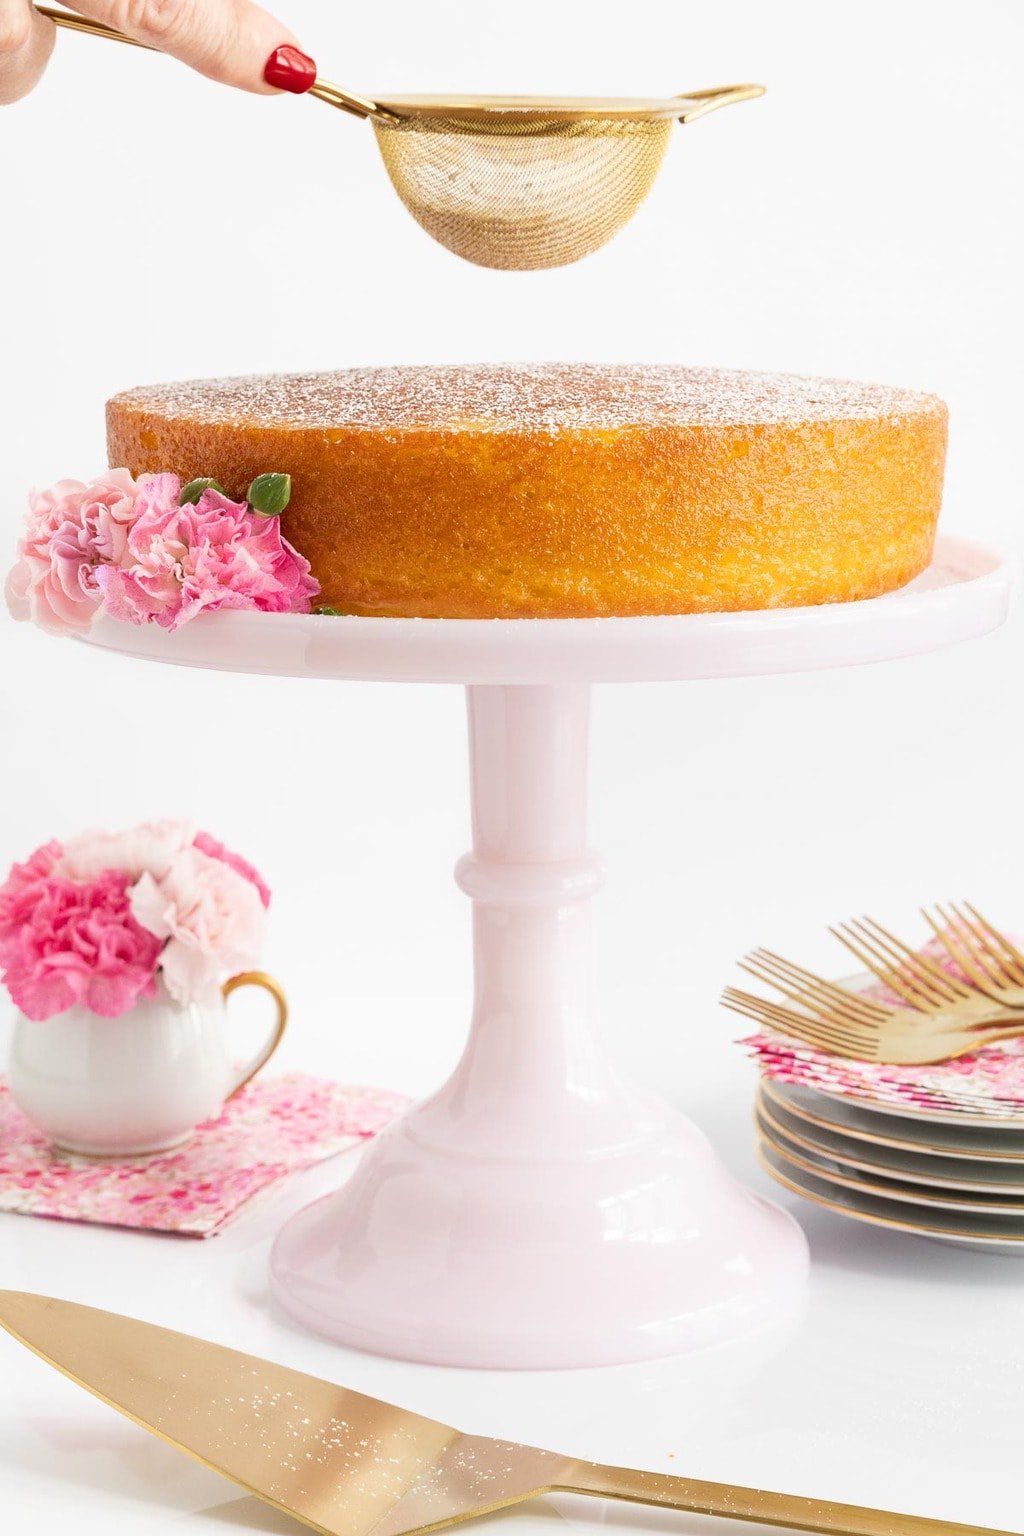 Vertical photo of a Ridiculously Easy French Butter Cake on a pink glass pedestal cake stand with a person sprinkling powdered sugar over the top.